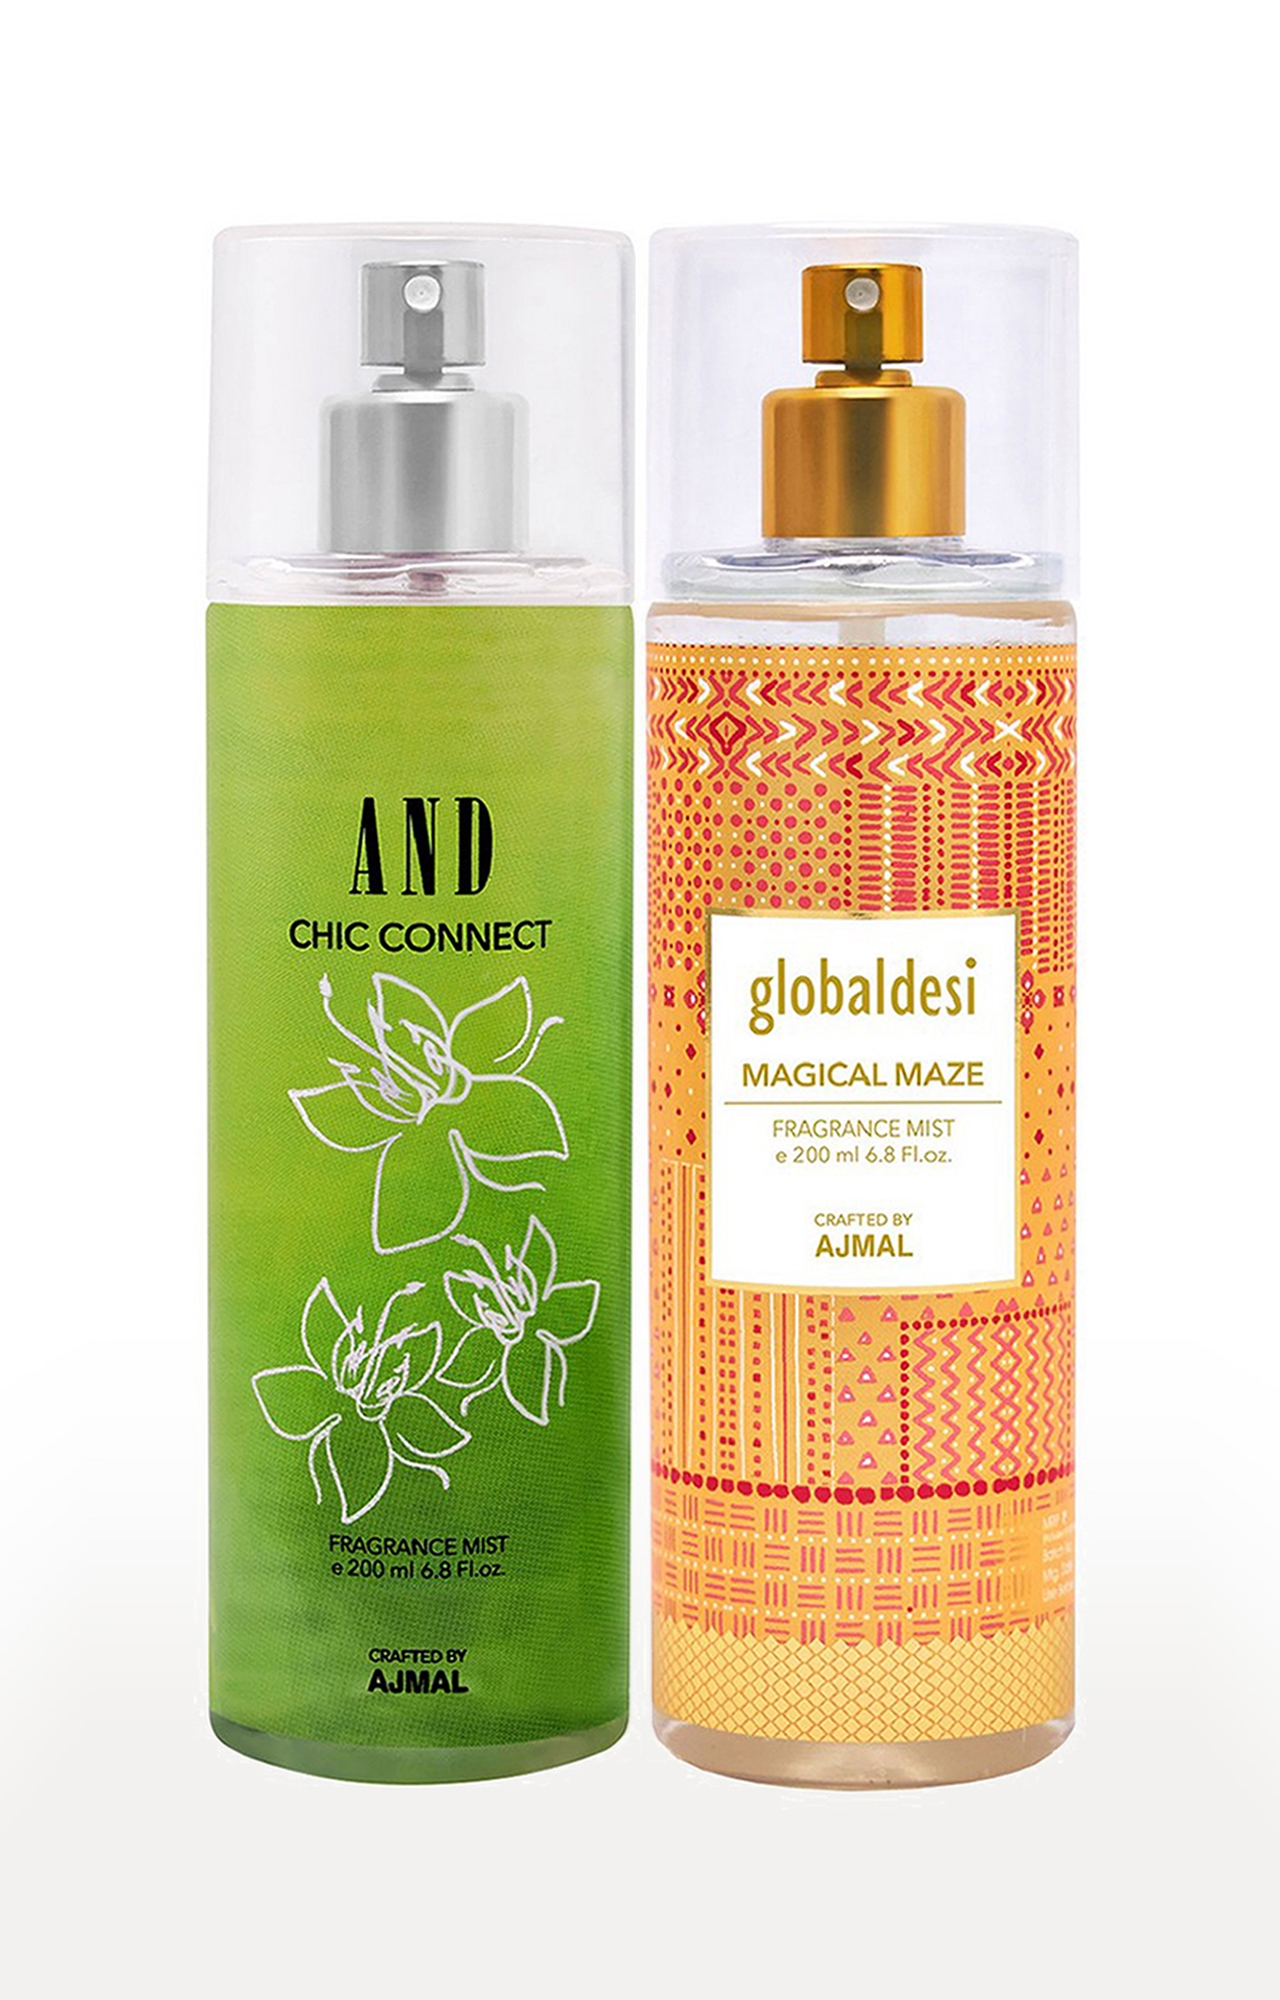 AND Crafted By Ajmal | AND Chi Connect Body Mist 200ML & Global Desi Magical Maze Body Mist 200ML Long Lasting Scent Spray Gift For Women Perfume FREE 0